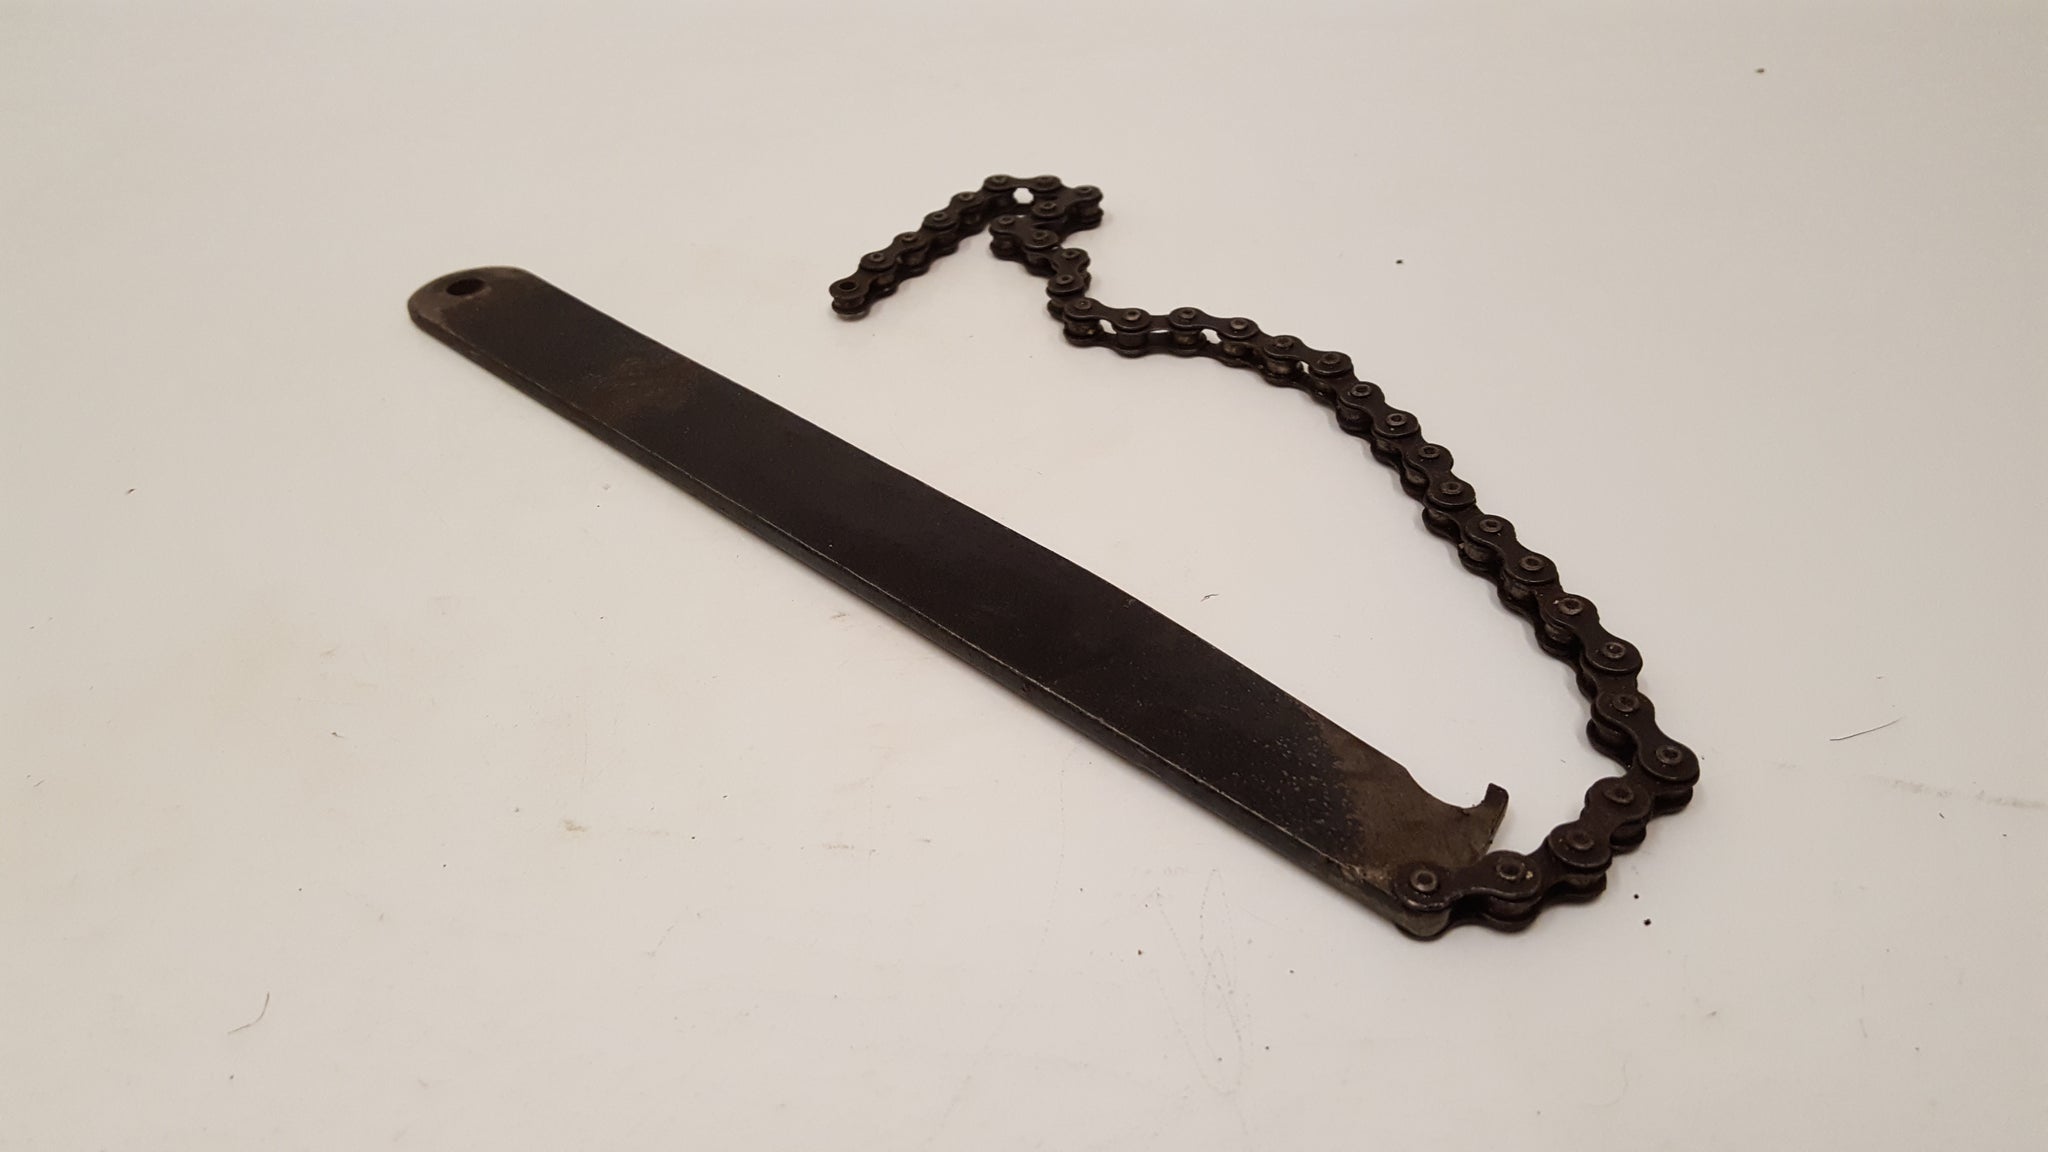 16" Vintage Chain Wrench 37477